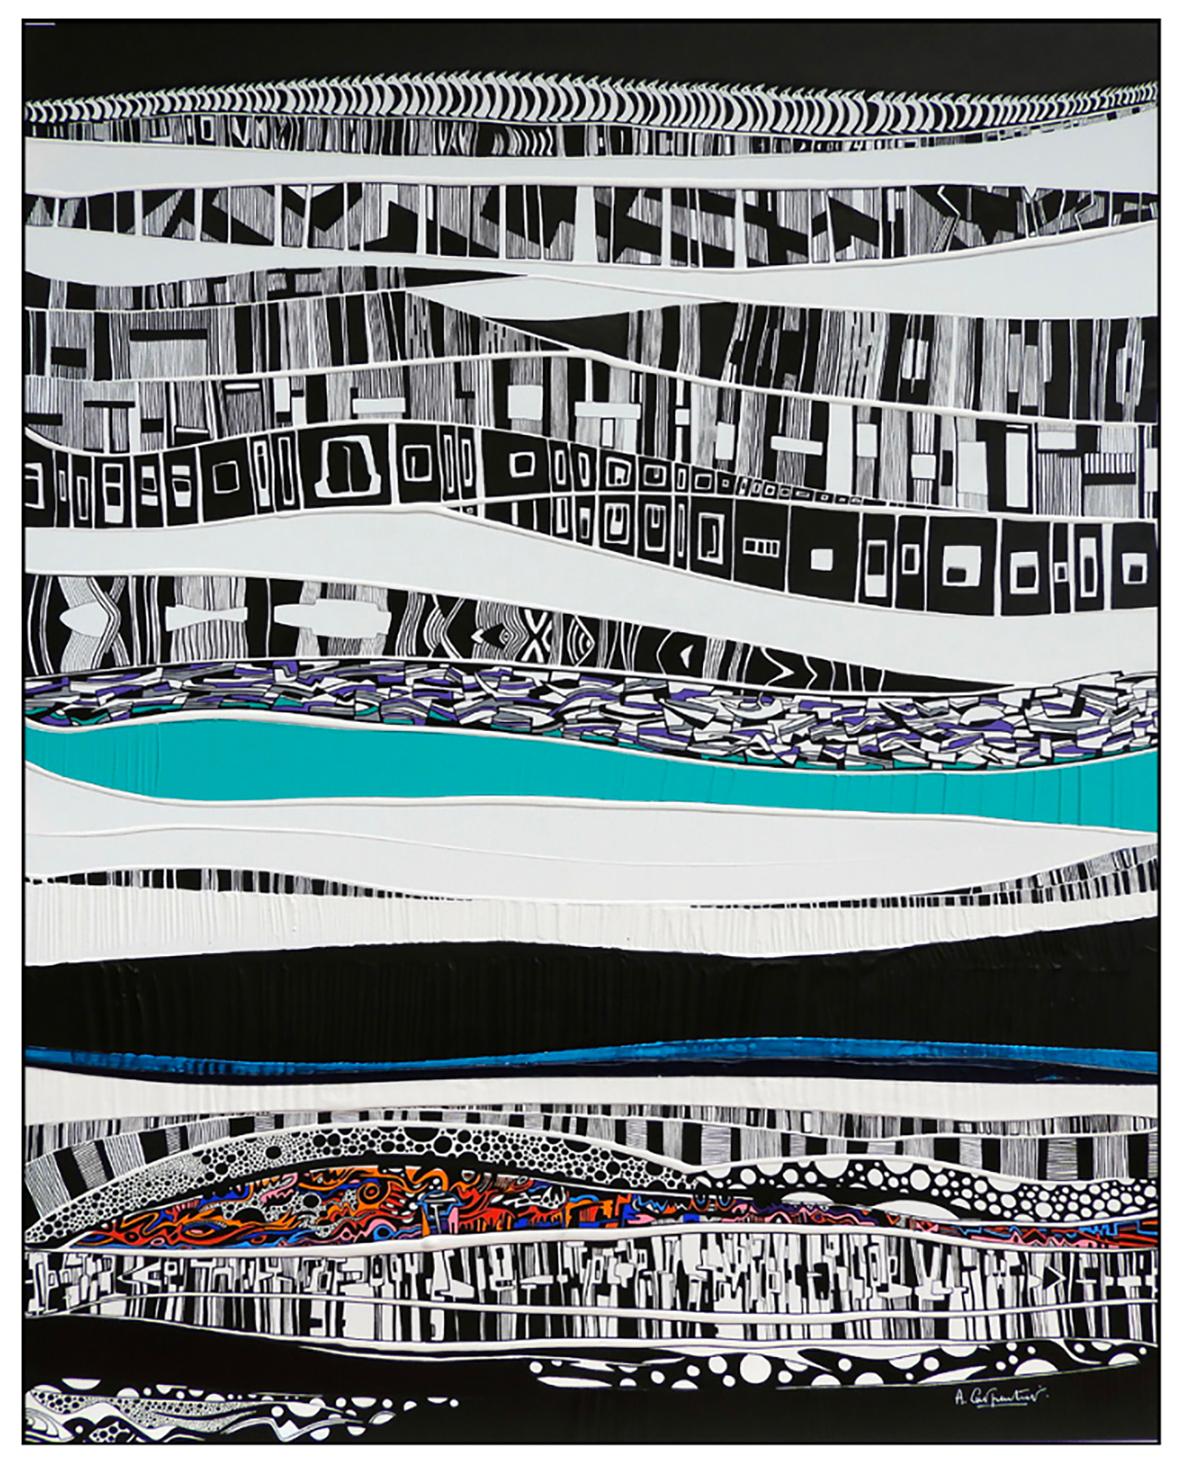 AntartiKa - Alain Carpentier
Vertical Format - 30 Figure (92cm x 73cm)
Acrylic pencil on canvas.
The flat colours are worked in the thick acrylic material.
2800 euros 
Alain Carpentier is an artist based in Brittany whose paintings have been